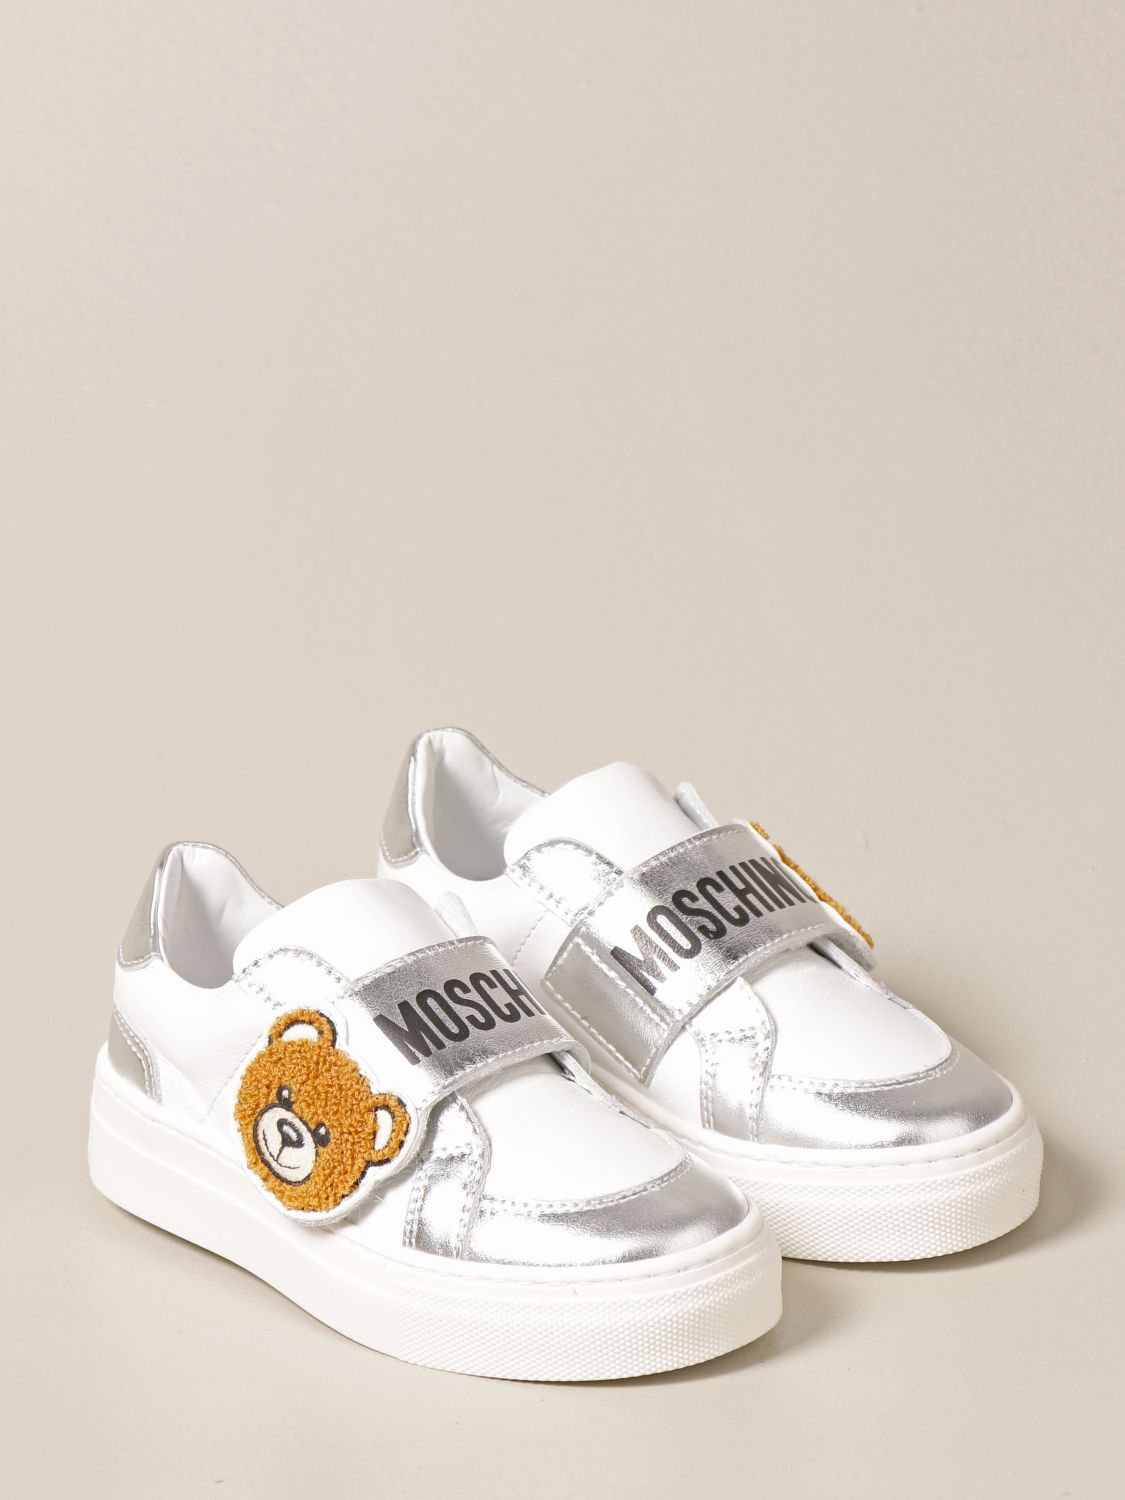 moschino baby shoes